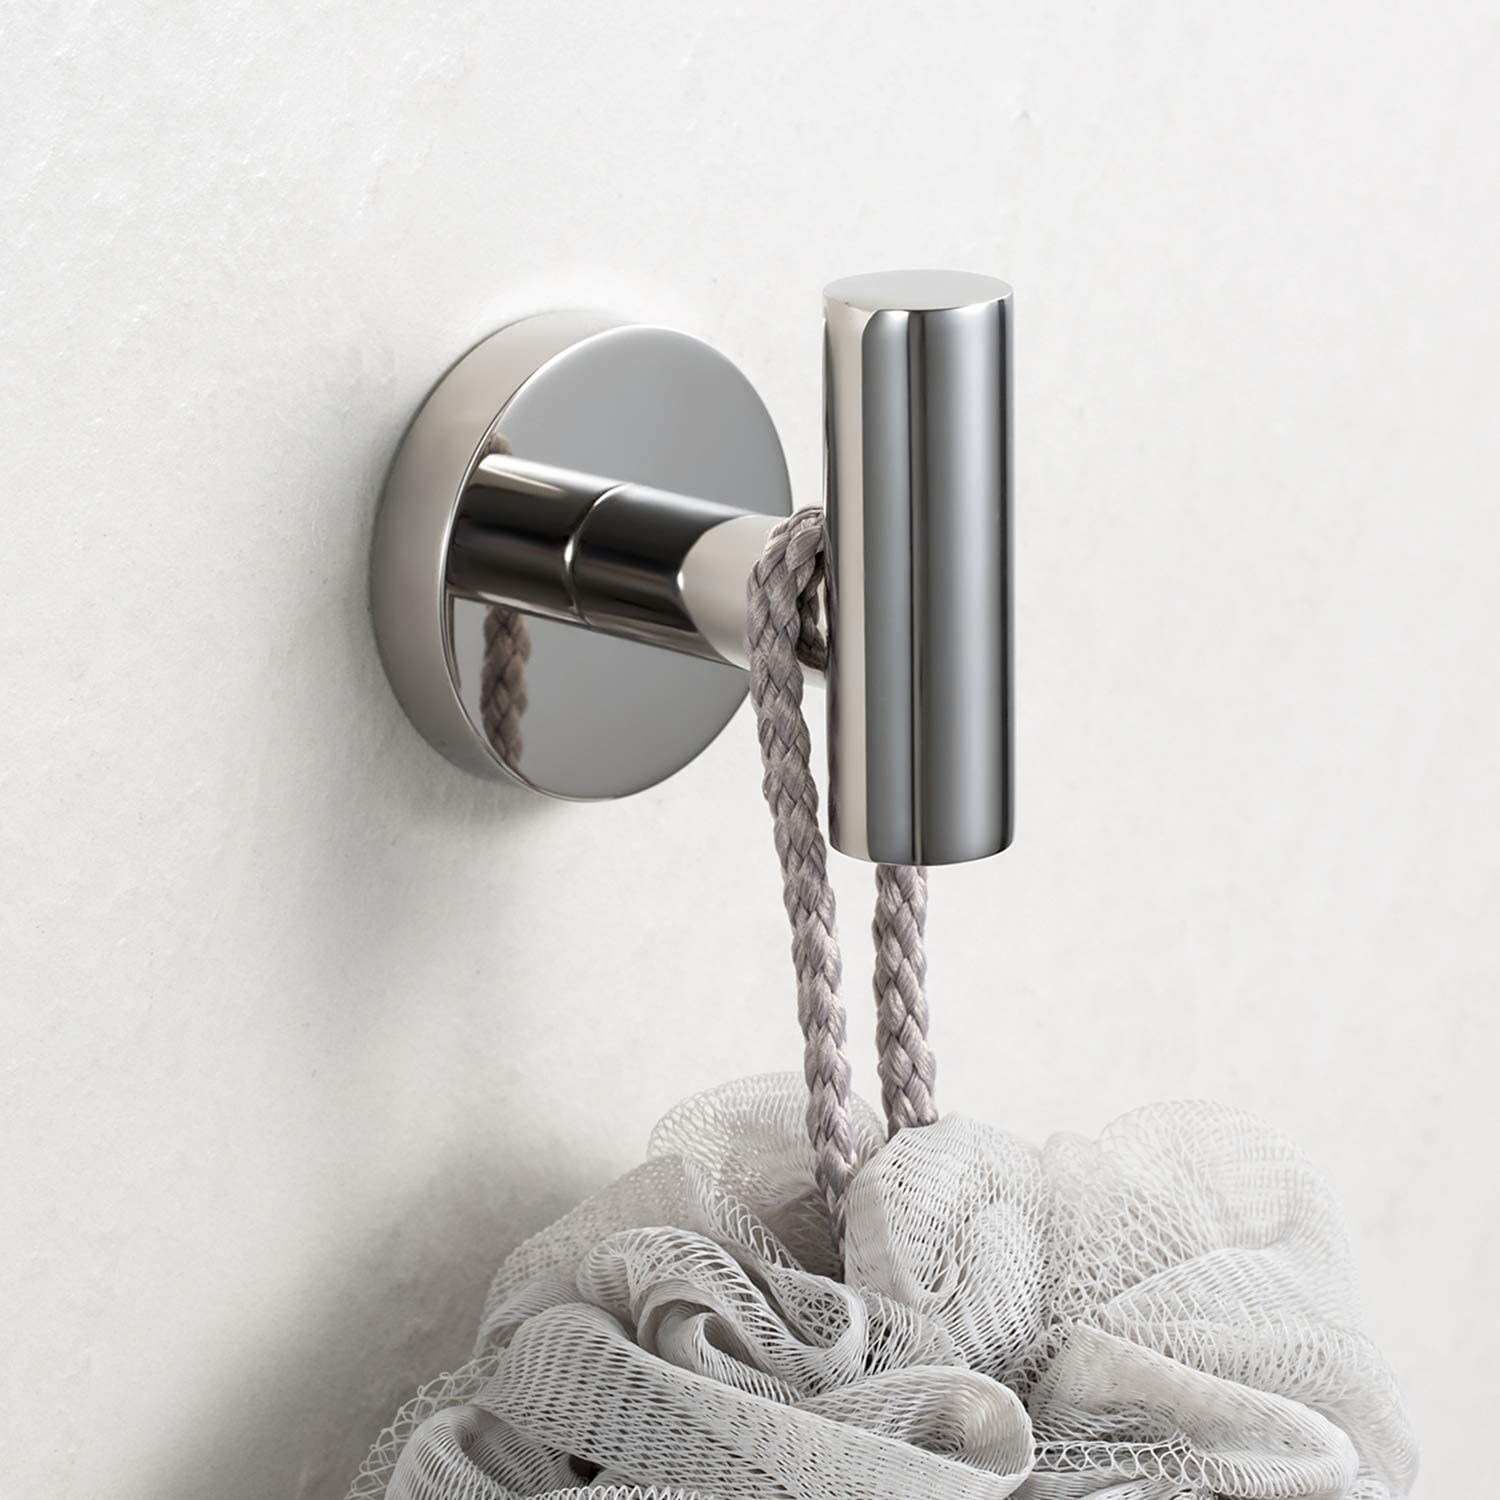 https://ak1.ostkcdn.com/images/products/is/images/direct/e10afc1b3bc182ec8b465d61133c05b106555203/Bathroom-Robe-and-Towel-Hook-in-Stainless-Steel.jpg